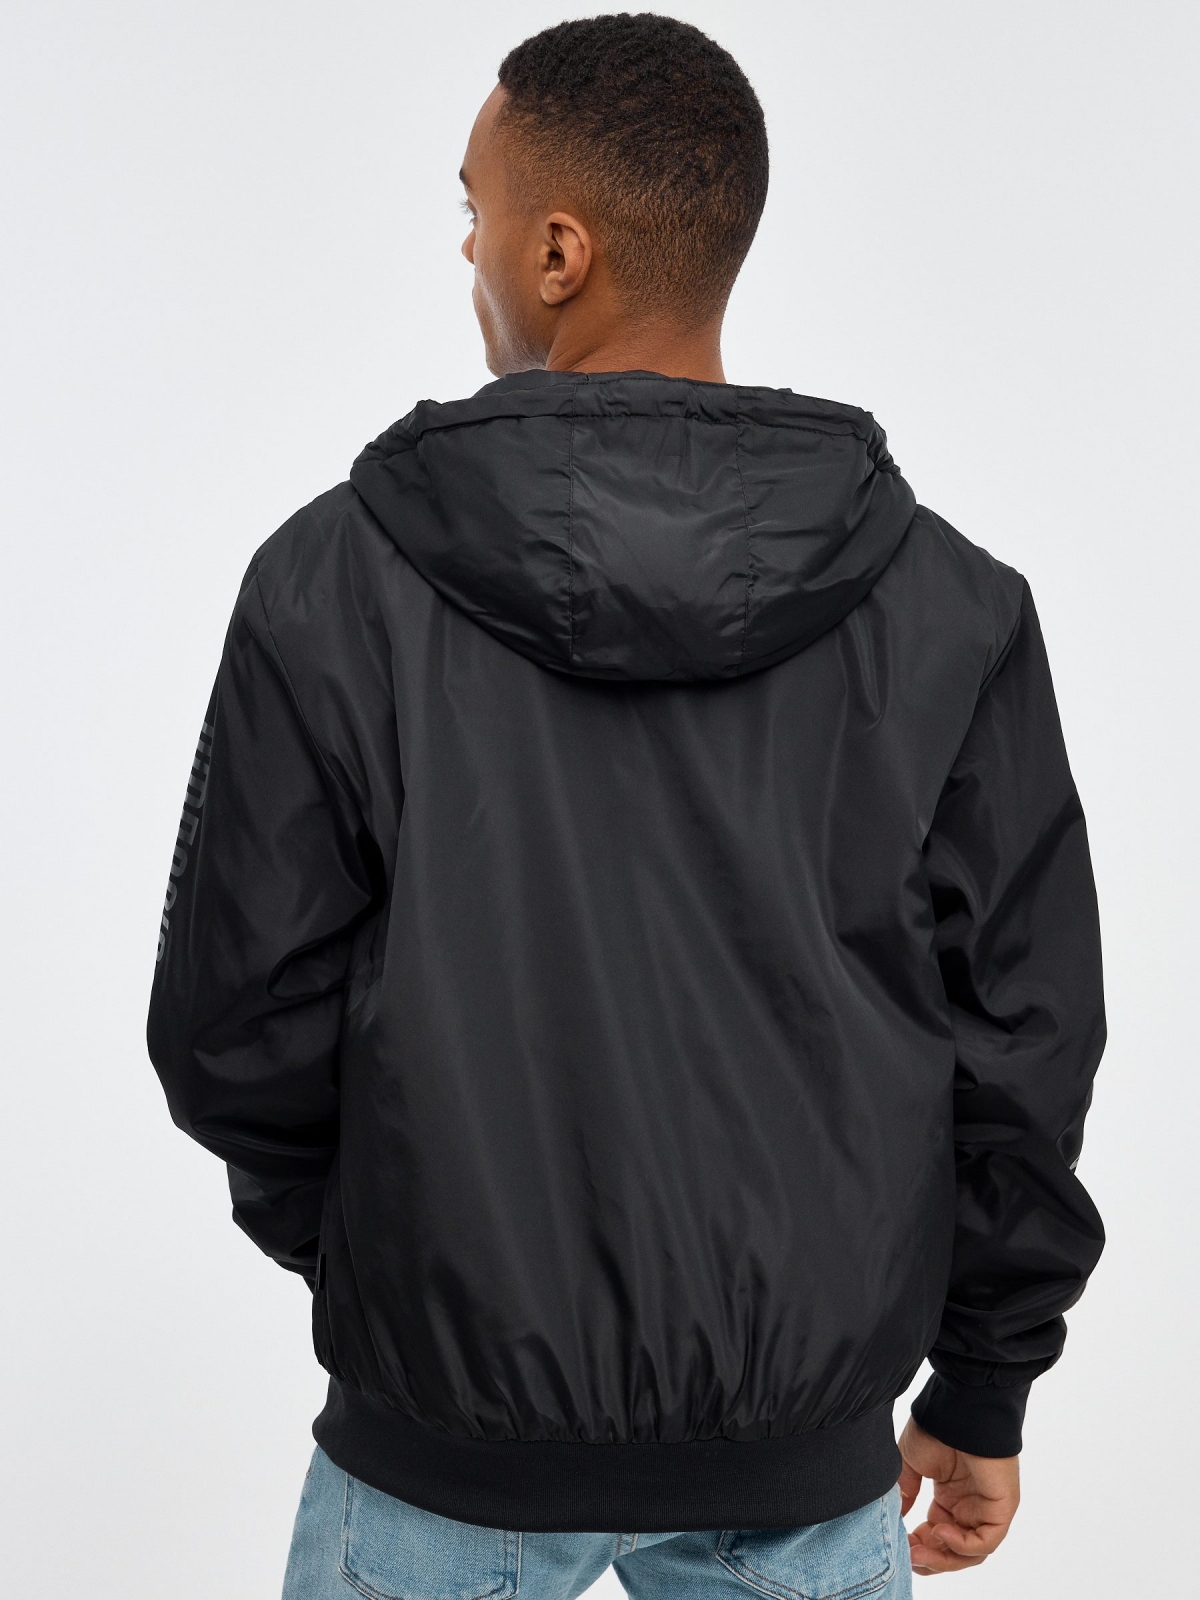 Nylon jacket with hood black middle back view